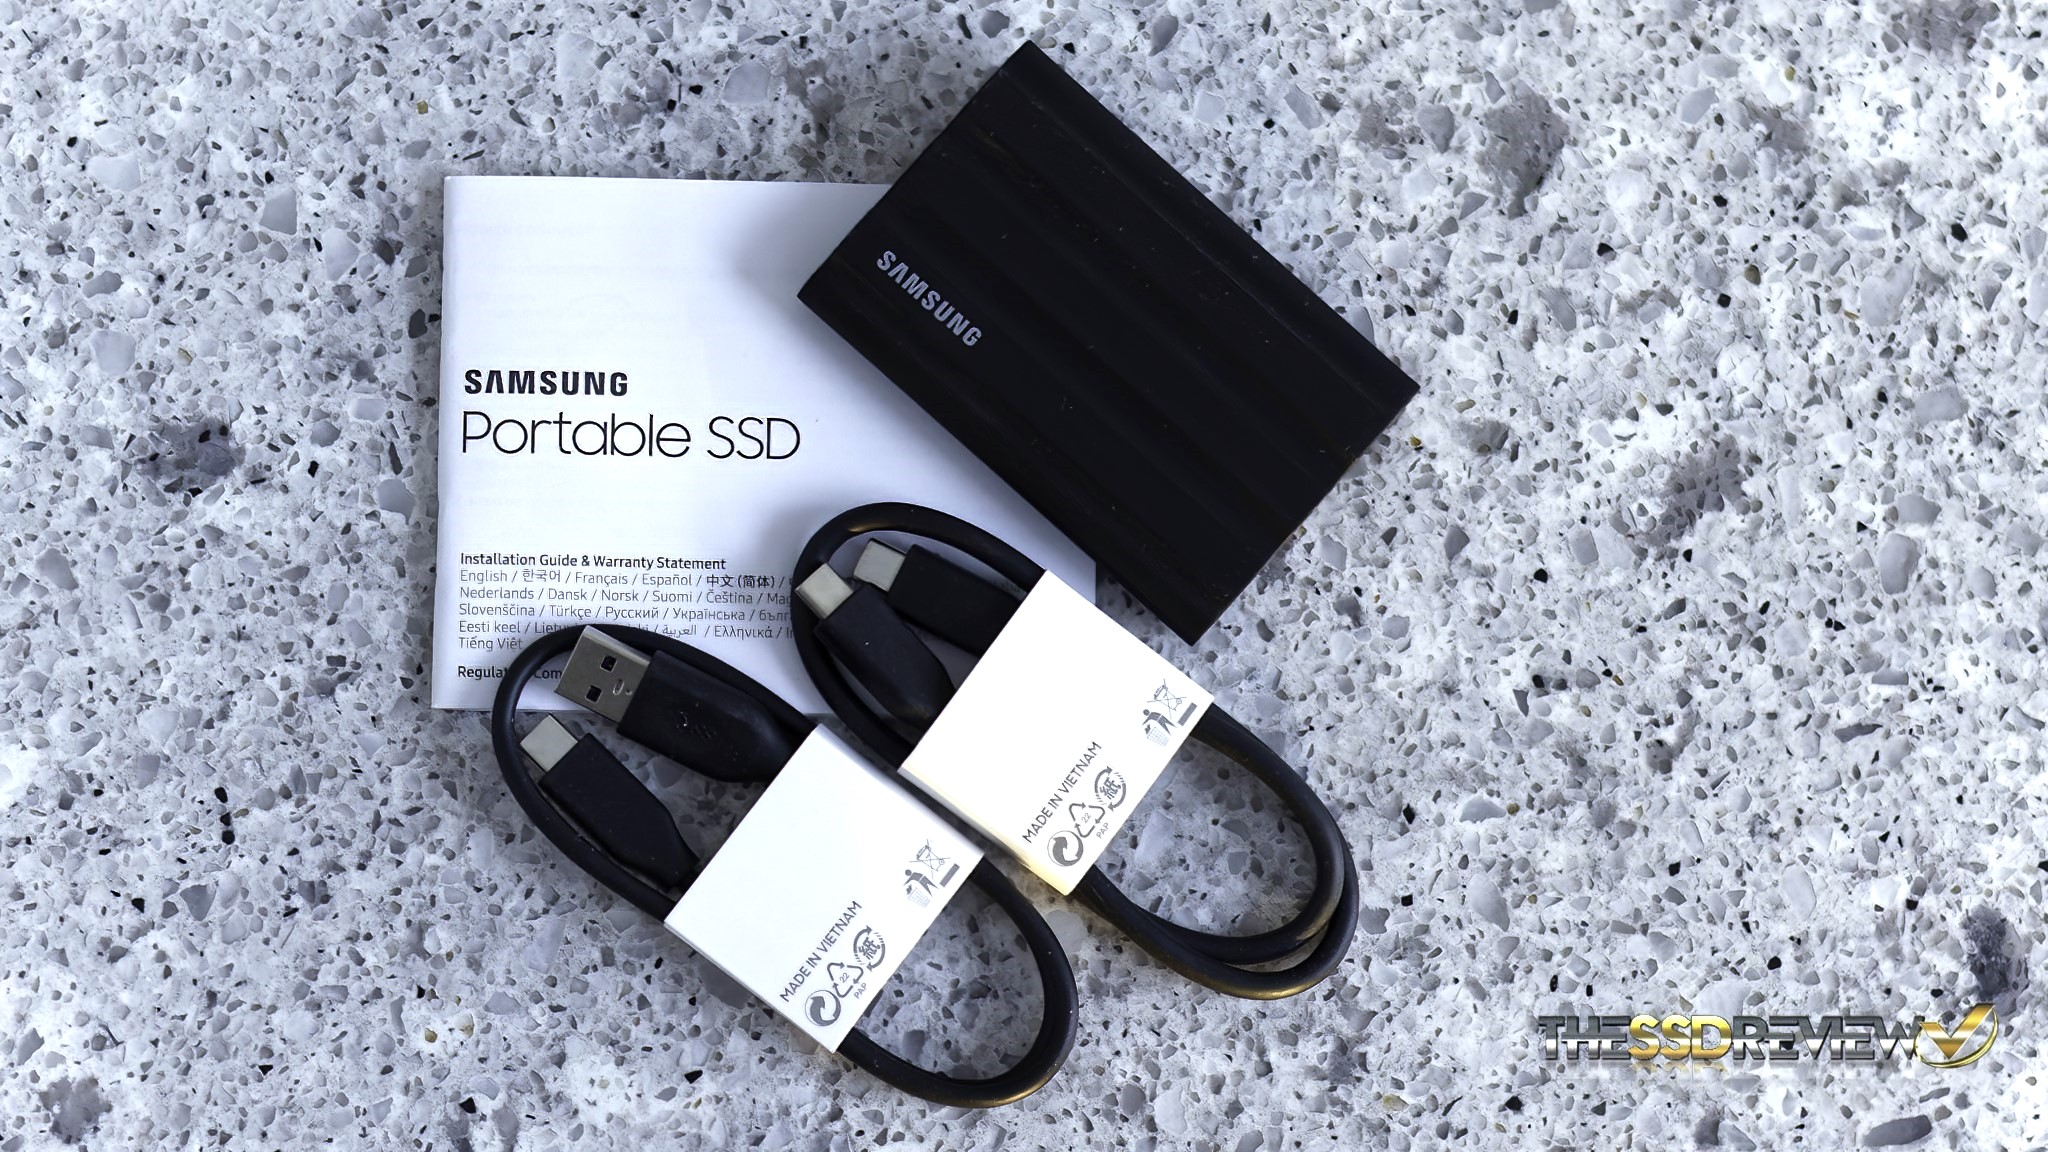 Samsung T7 Shield Portable SSD Review 